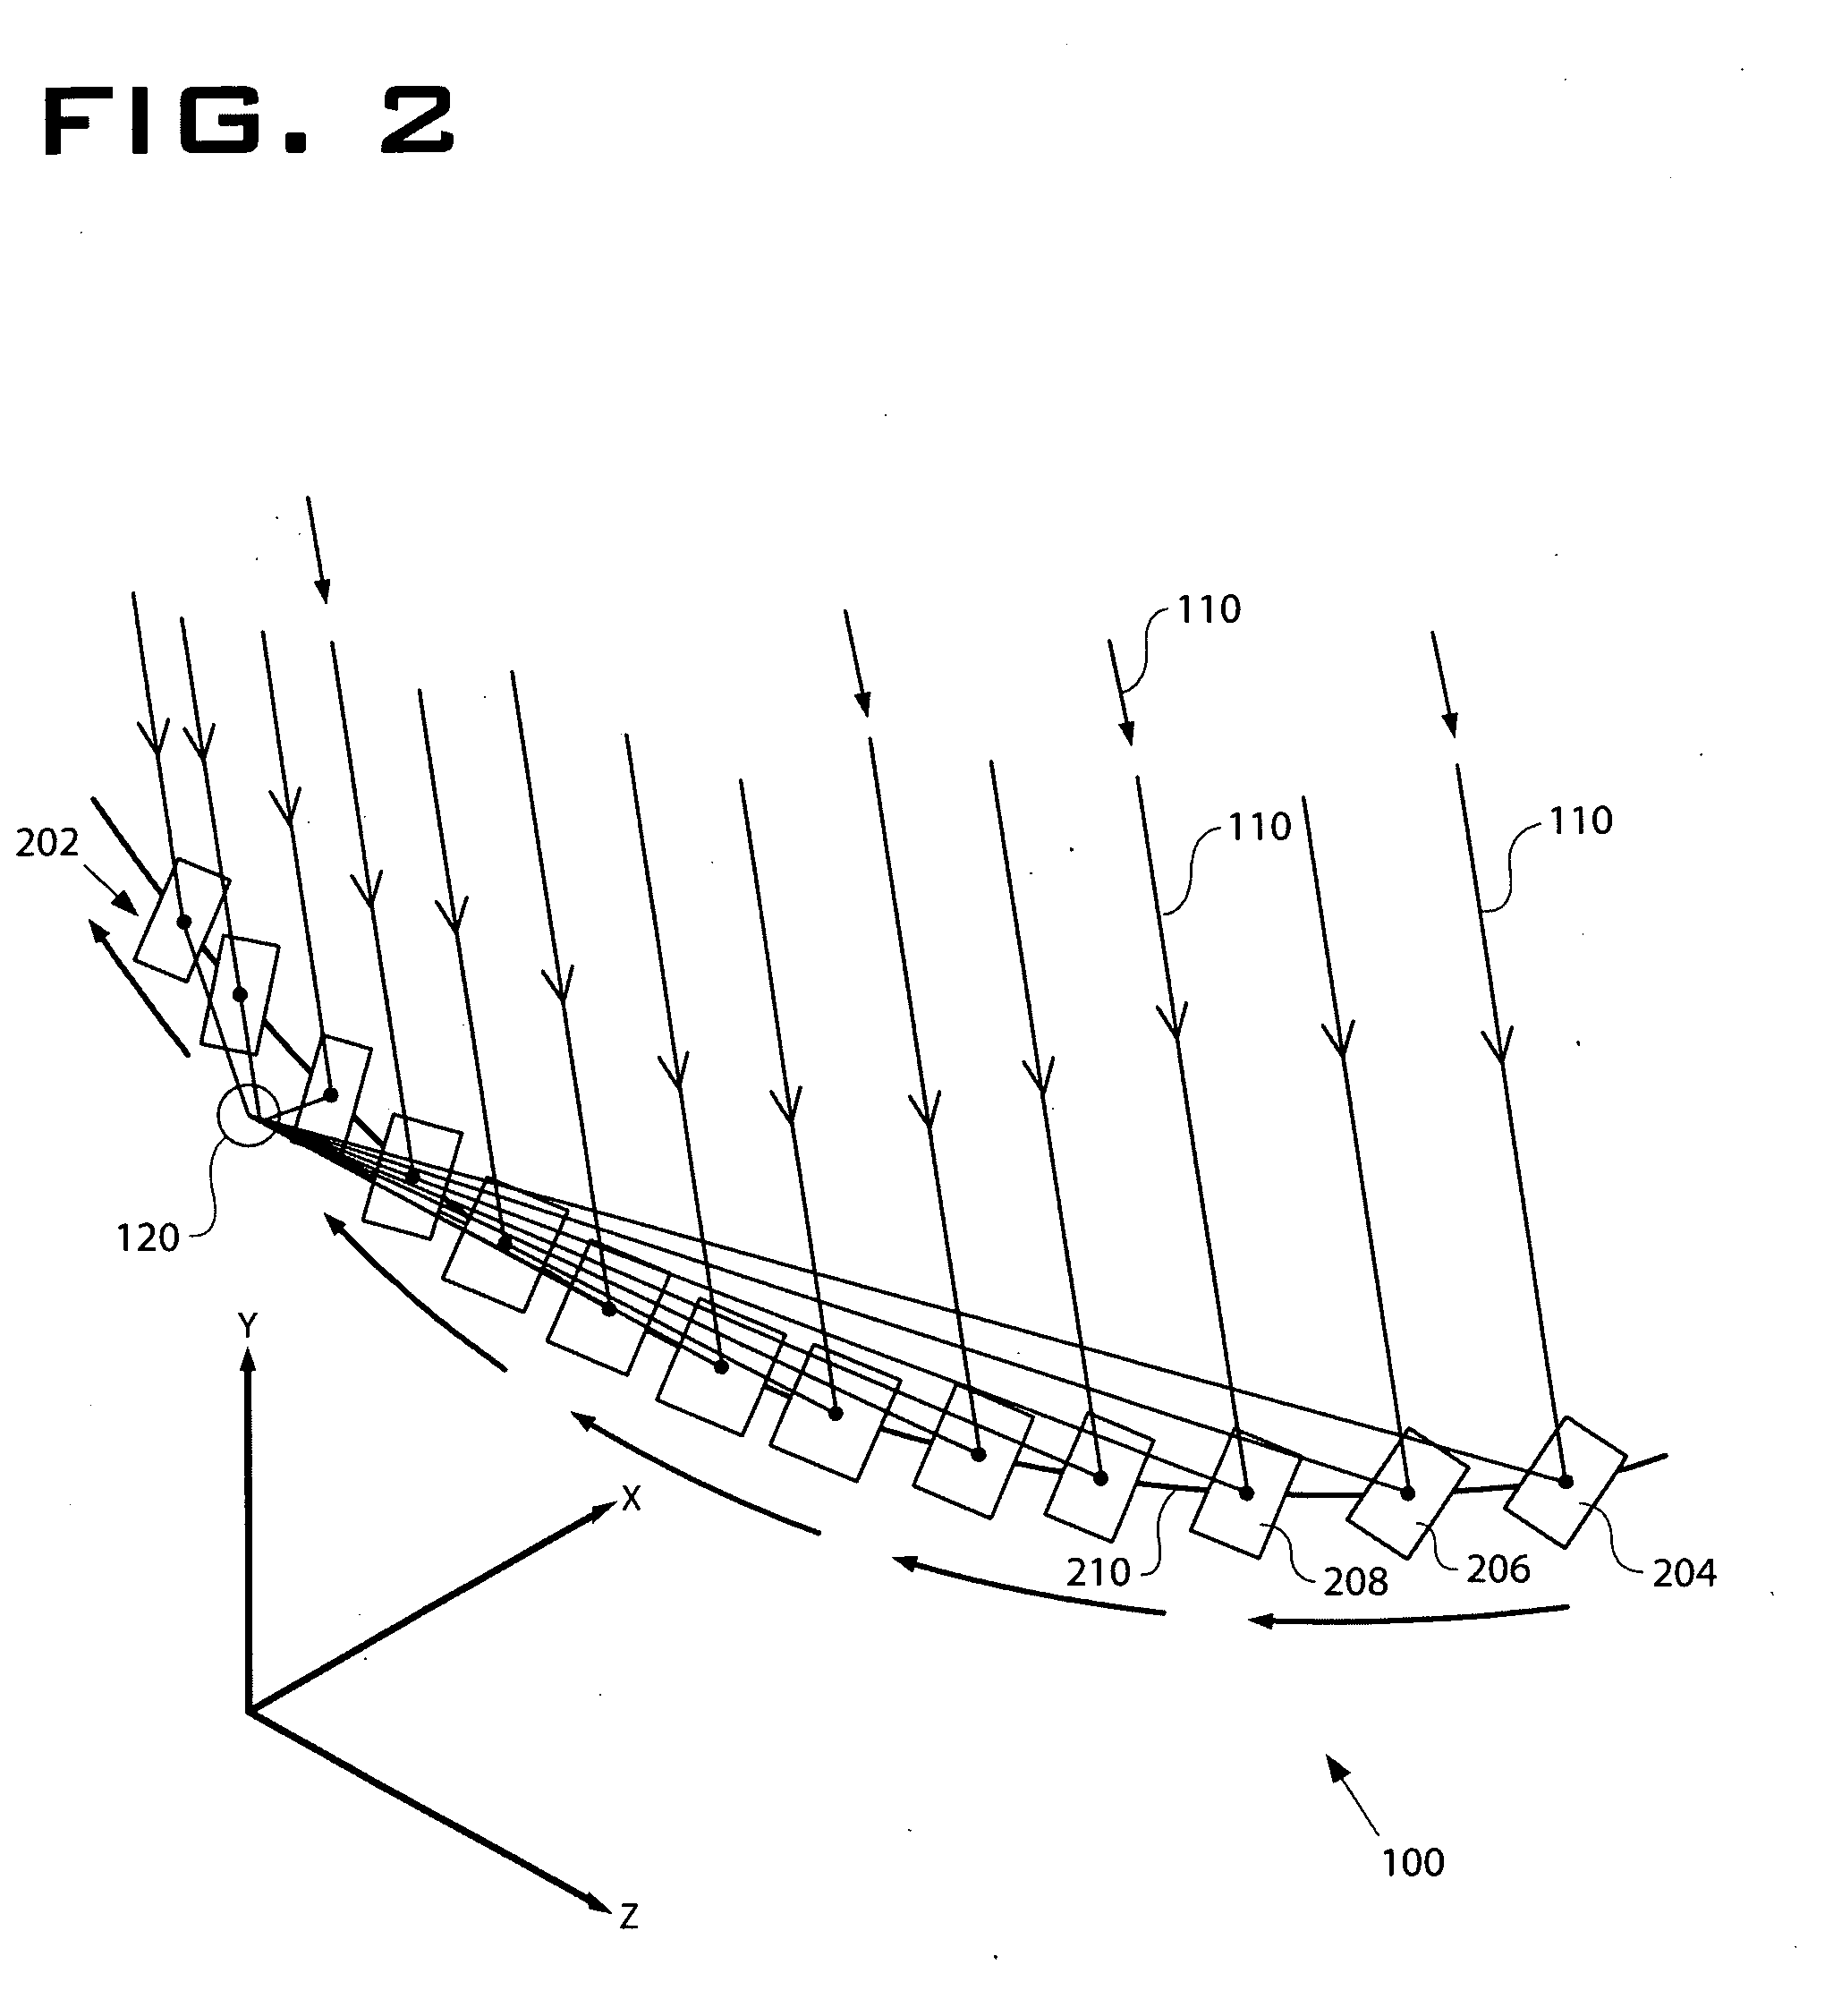 System and Method of Focusing Electromagnetic Radiation